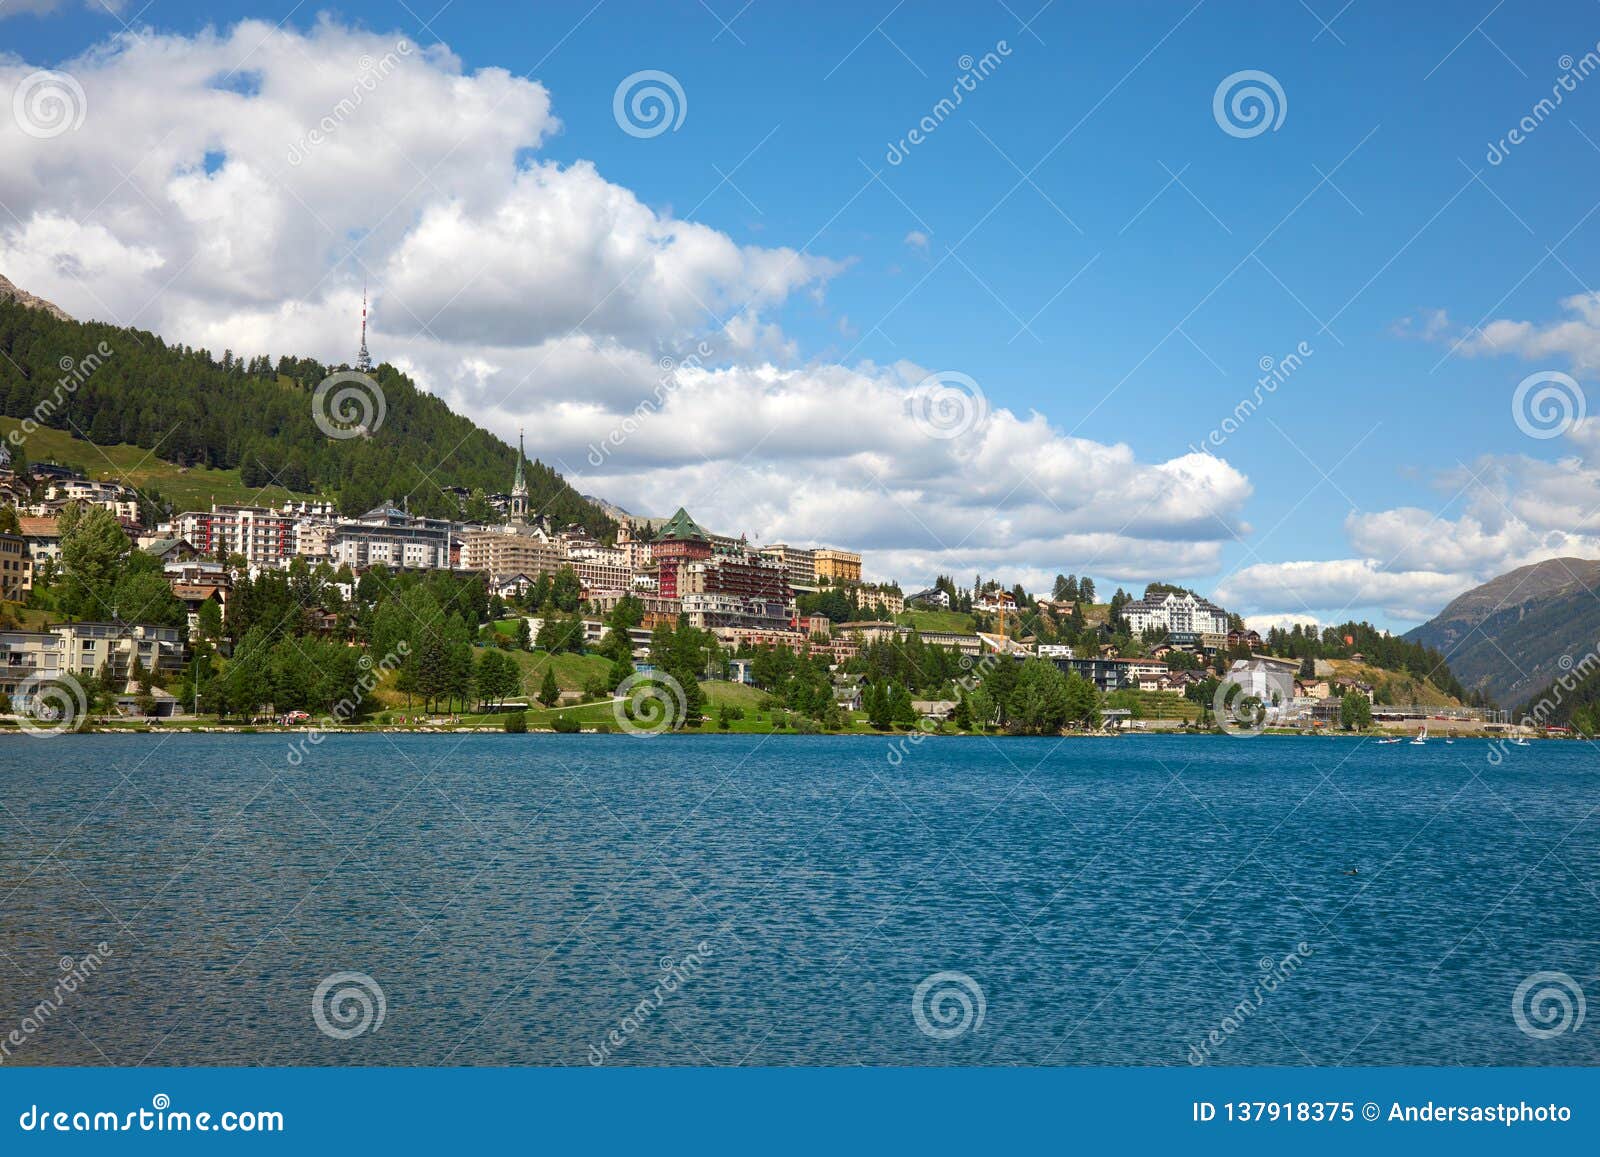 sankt moritz town and lake in a summer day, white clouds in switzerland